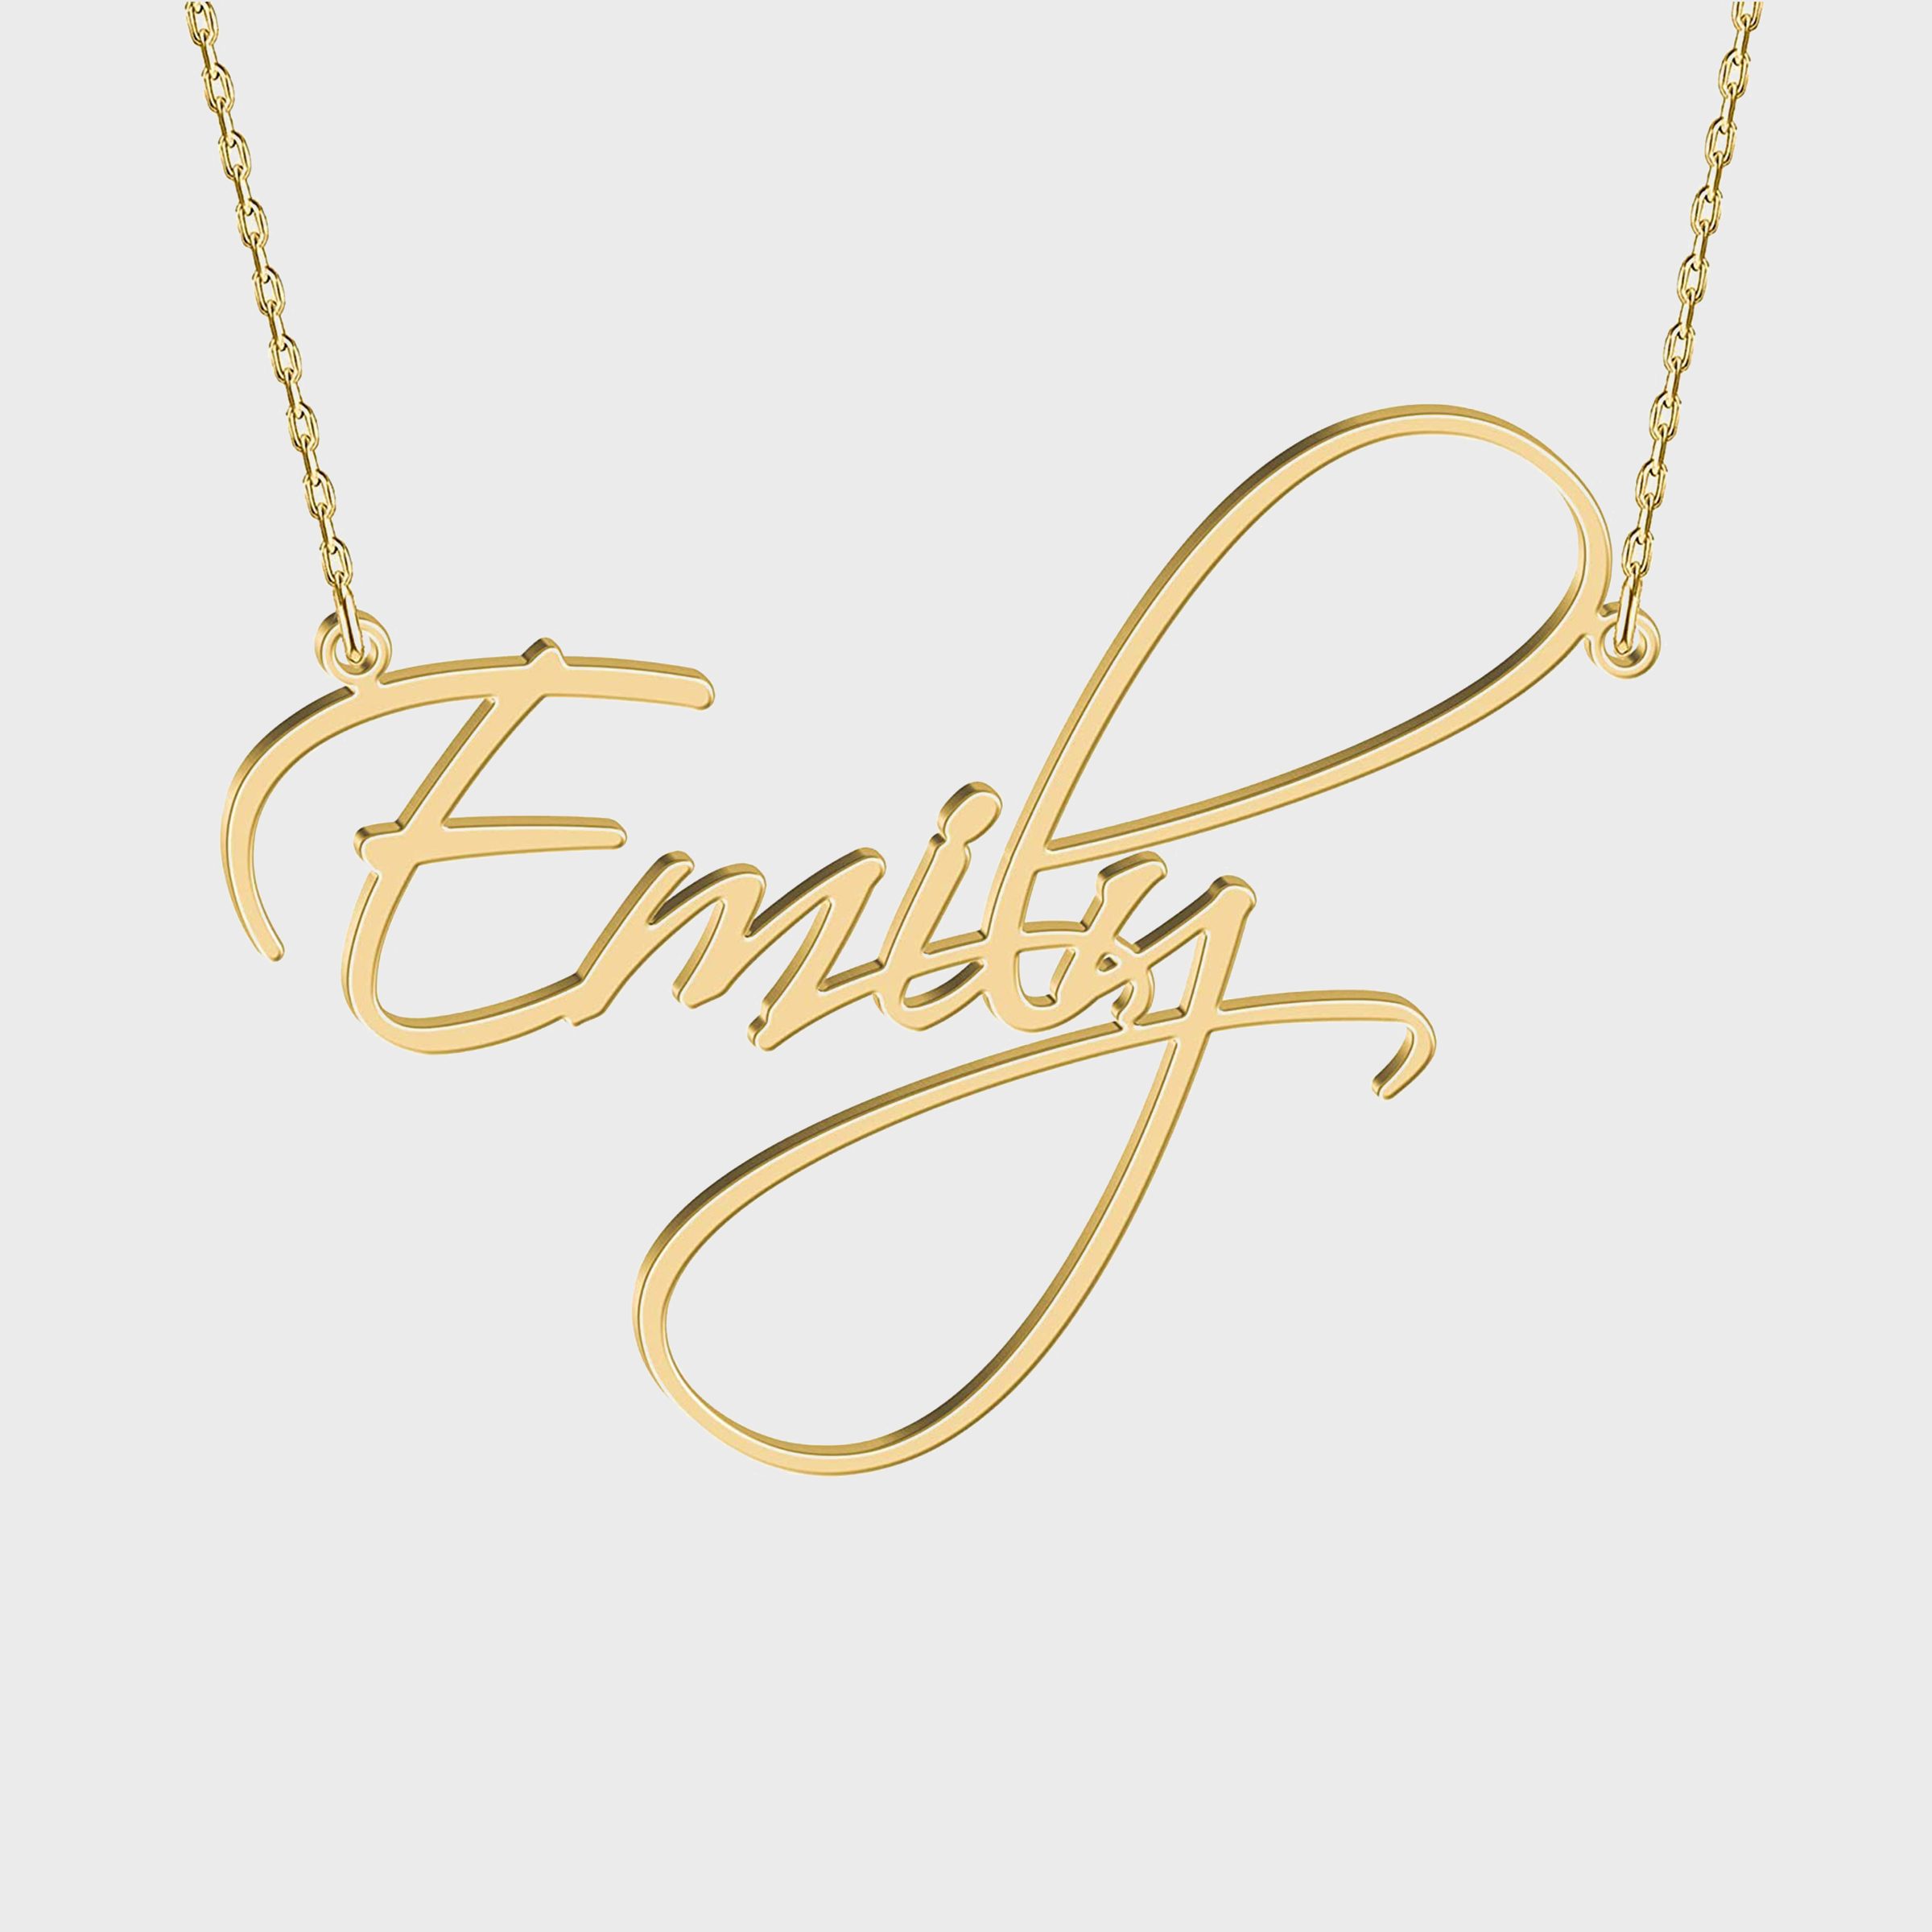 Joelle Jewelry Design Sterling Silver Name Necklace